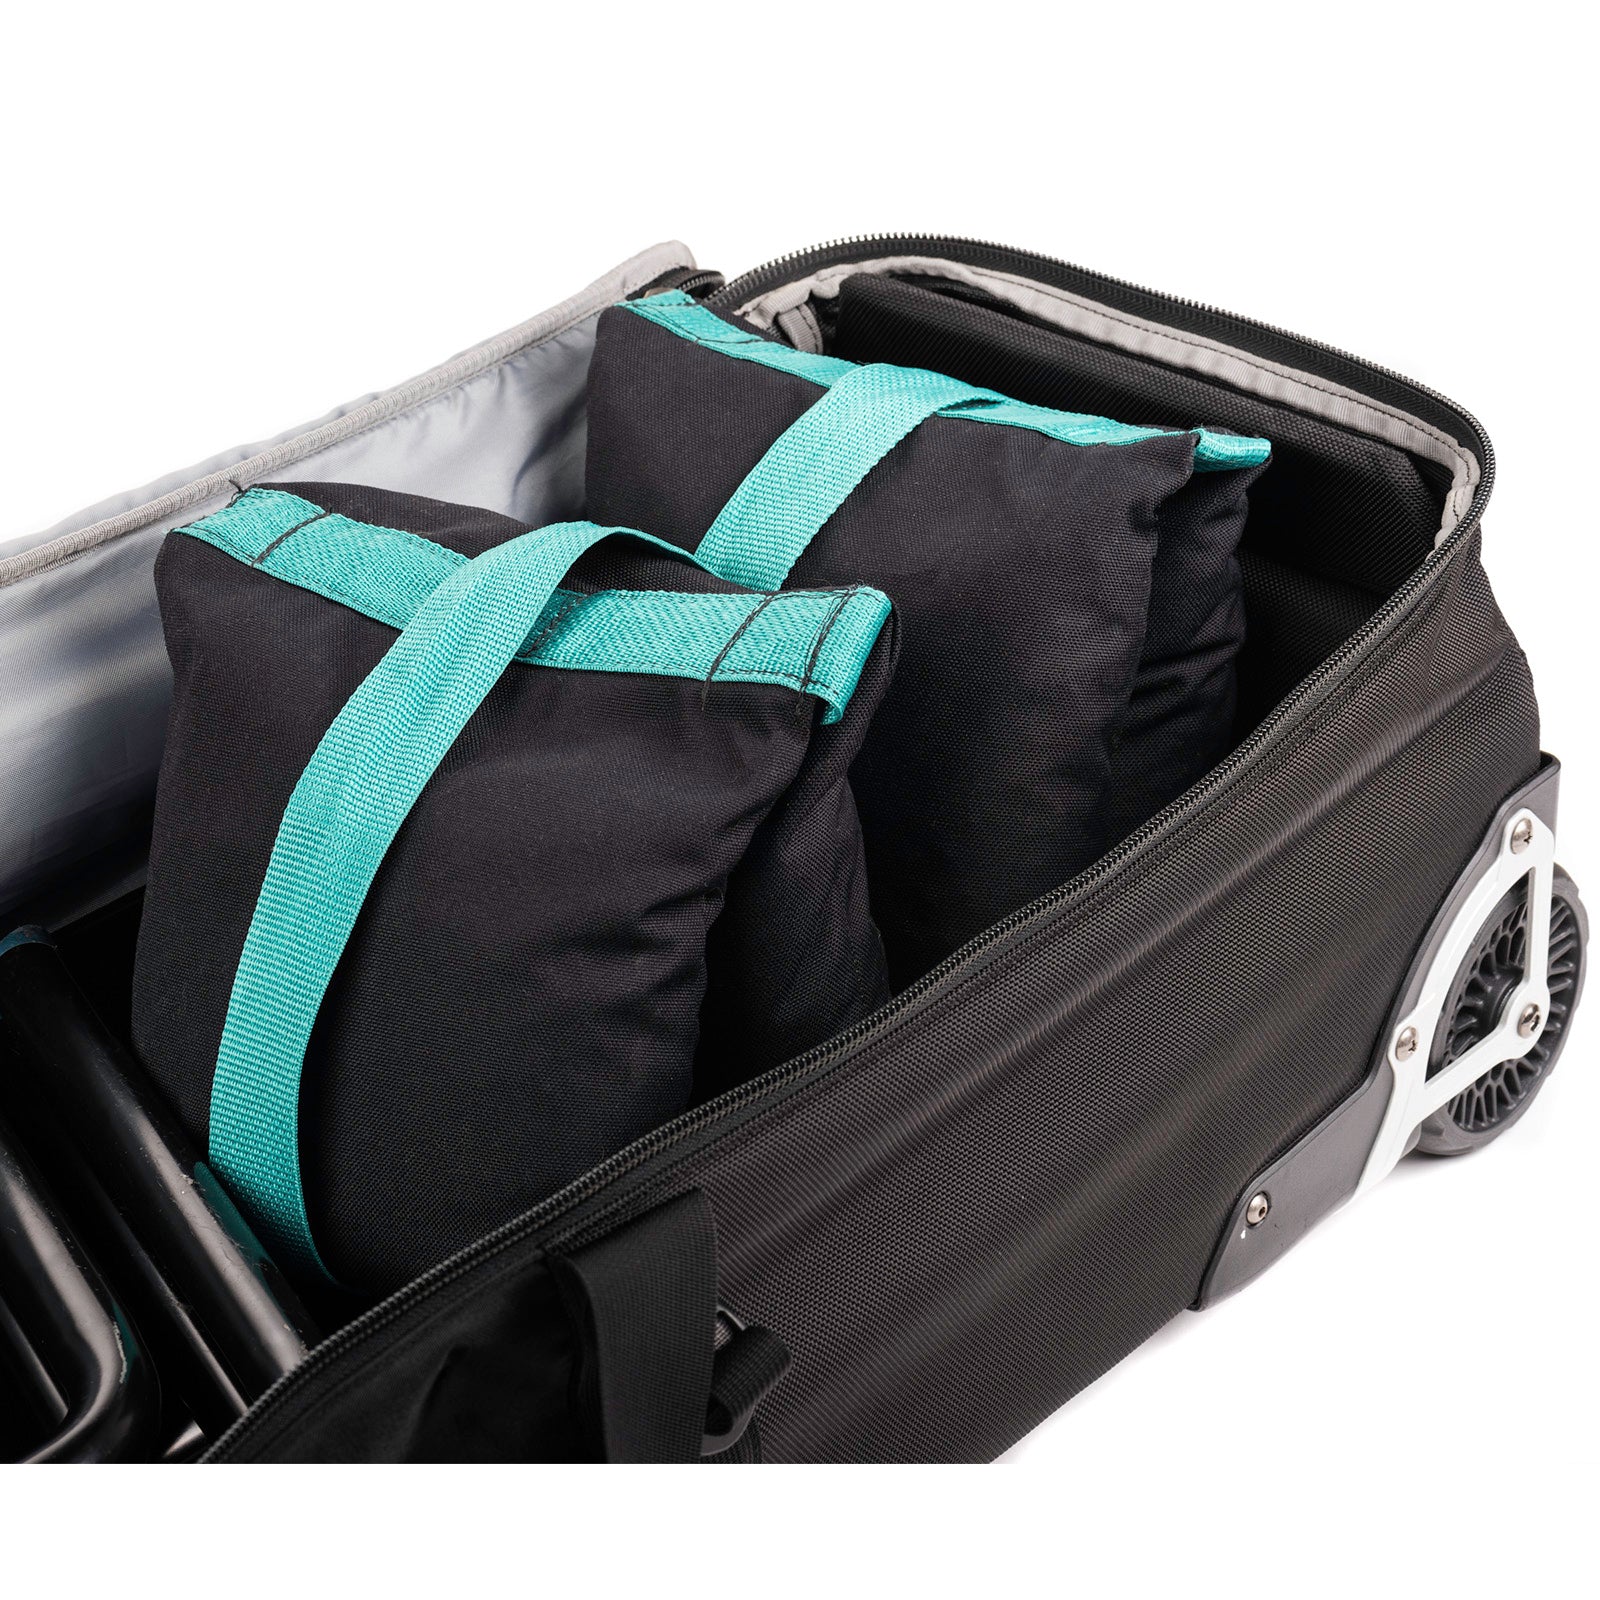 Think Tank Stand Manager 52 Rolling Bag